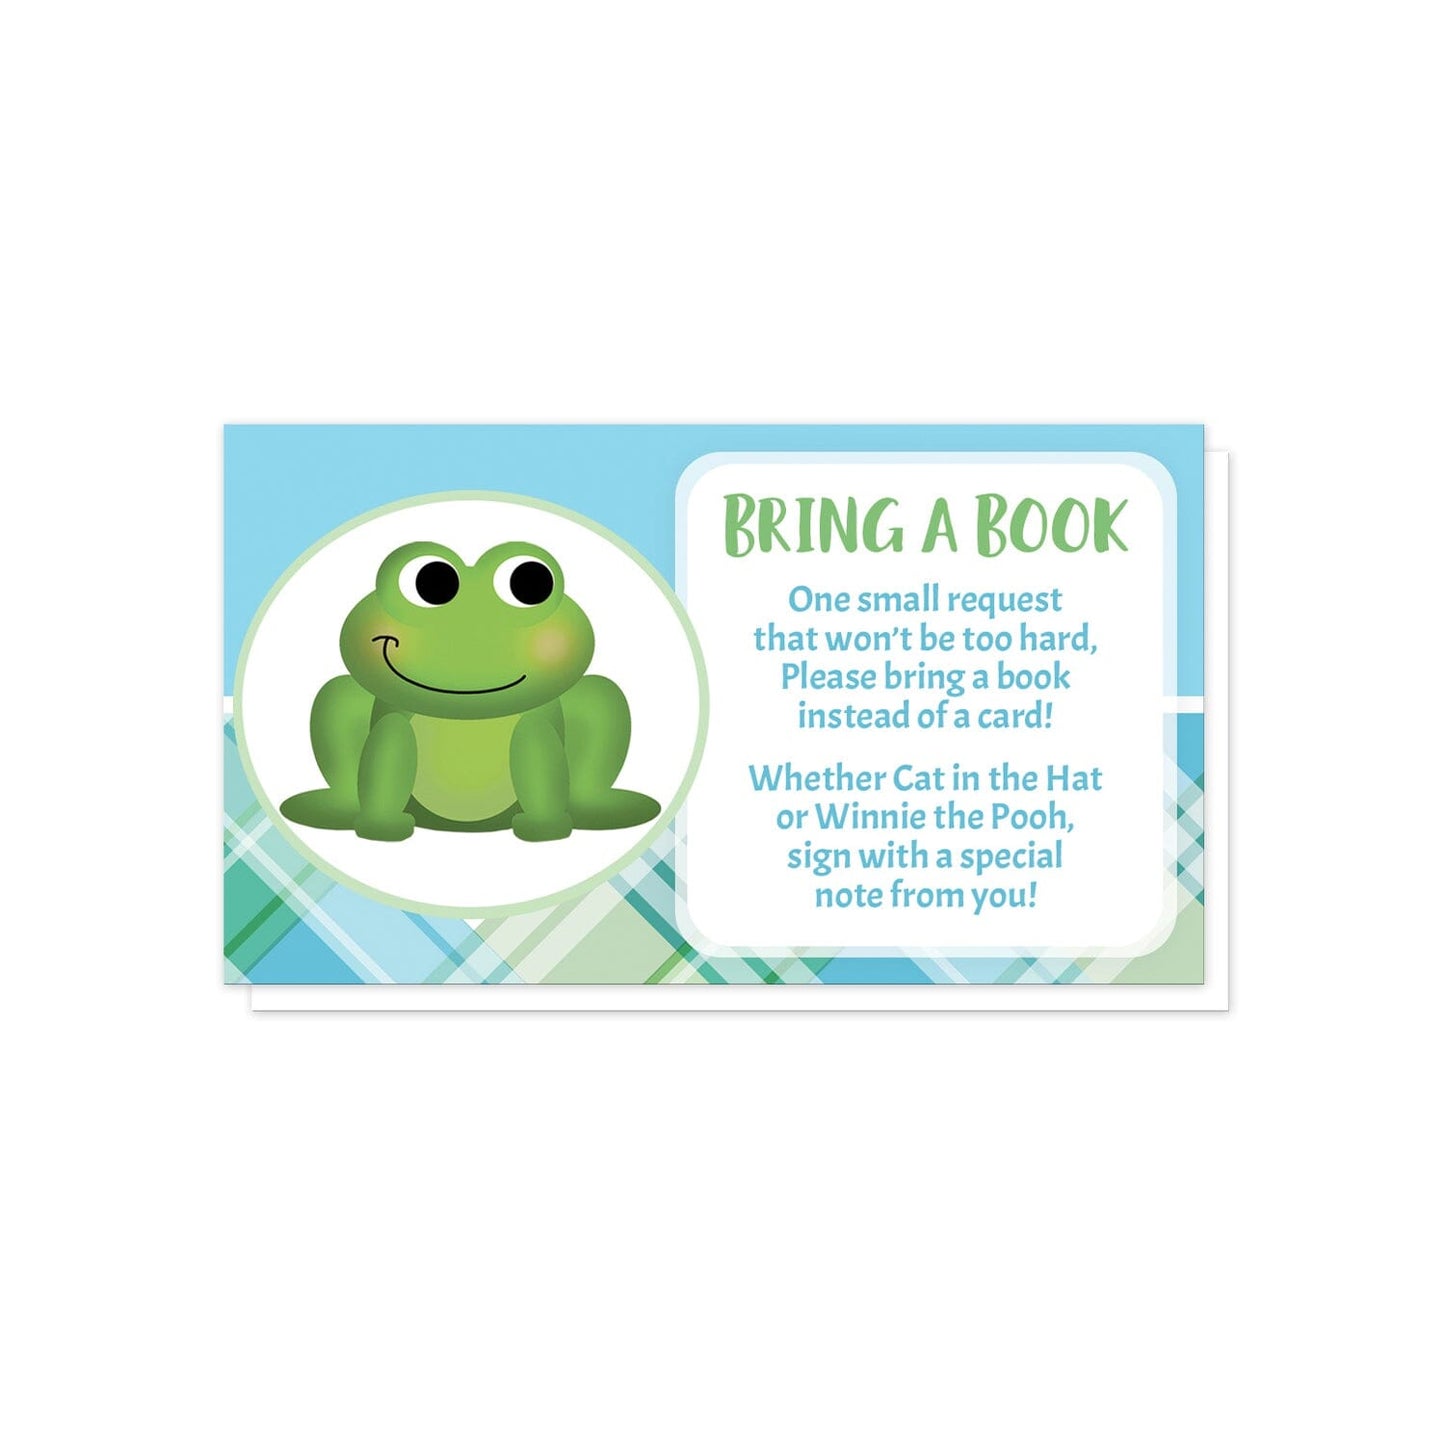 Cute Frog Green and Blue Plaid Bring a Book Cards at Artistically Invited. Cute frog green and blue plaid bring a book cards illustrated with an adorable green frog in a white and green oval on the left side over a blue background along the top and a green and blue plaid pattern background along the bottom. Your book request details are printed in green and blue in a white rectangular area over the background design on the right side.